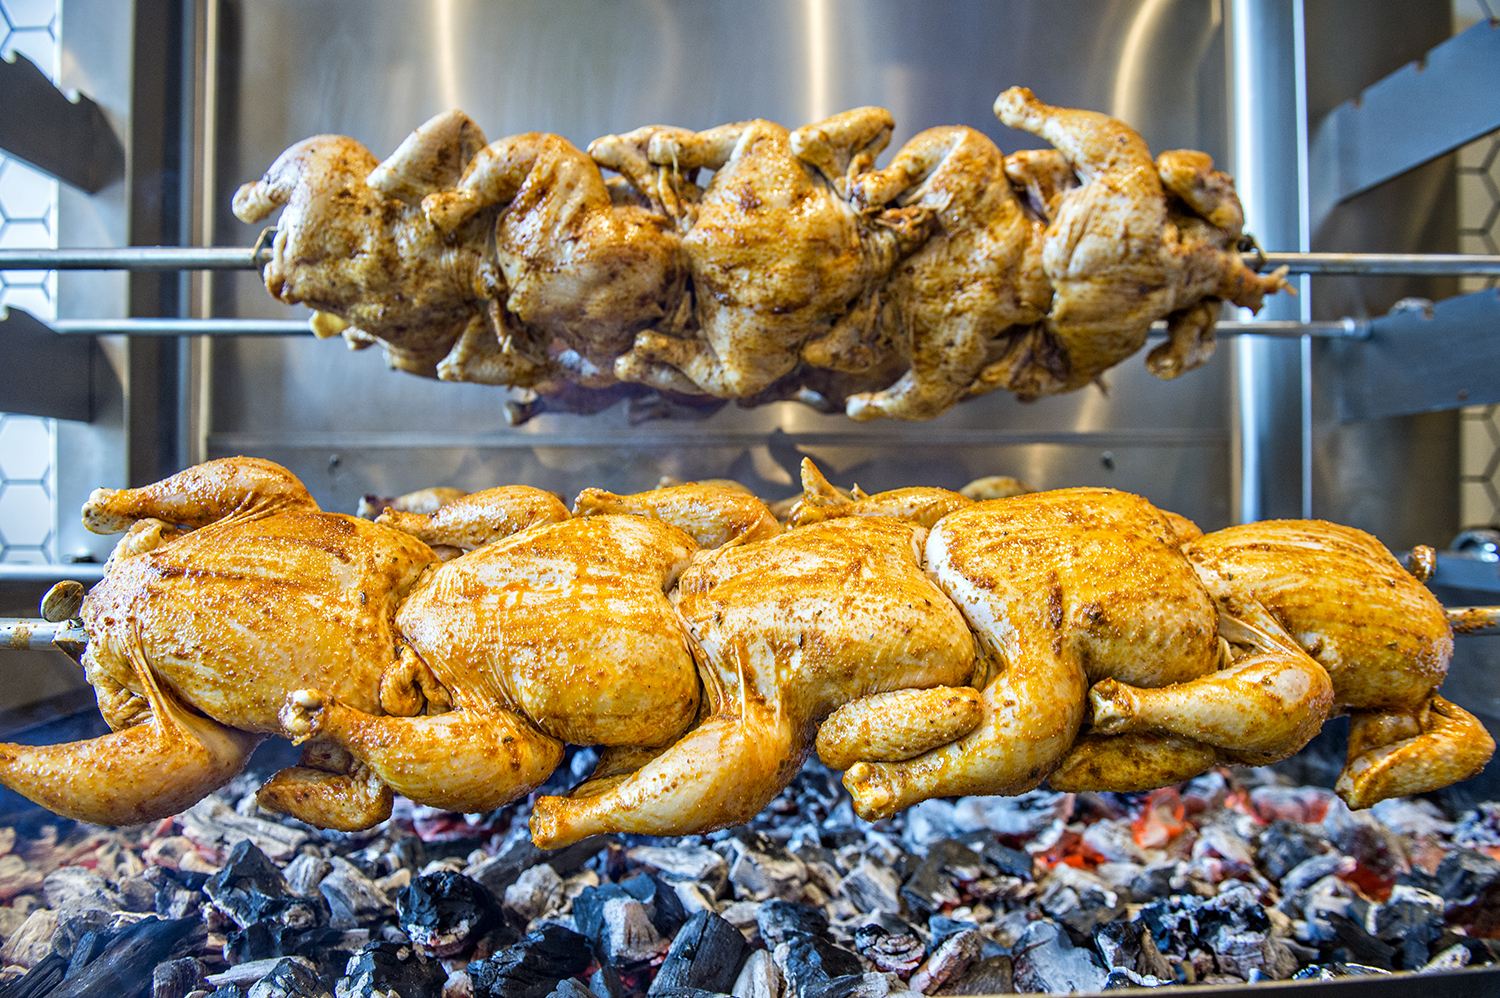 A close-up photo of two line of rotisserie chickens cooking on skewers